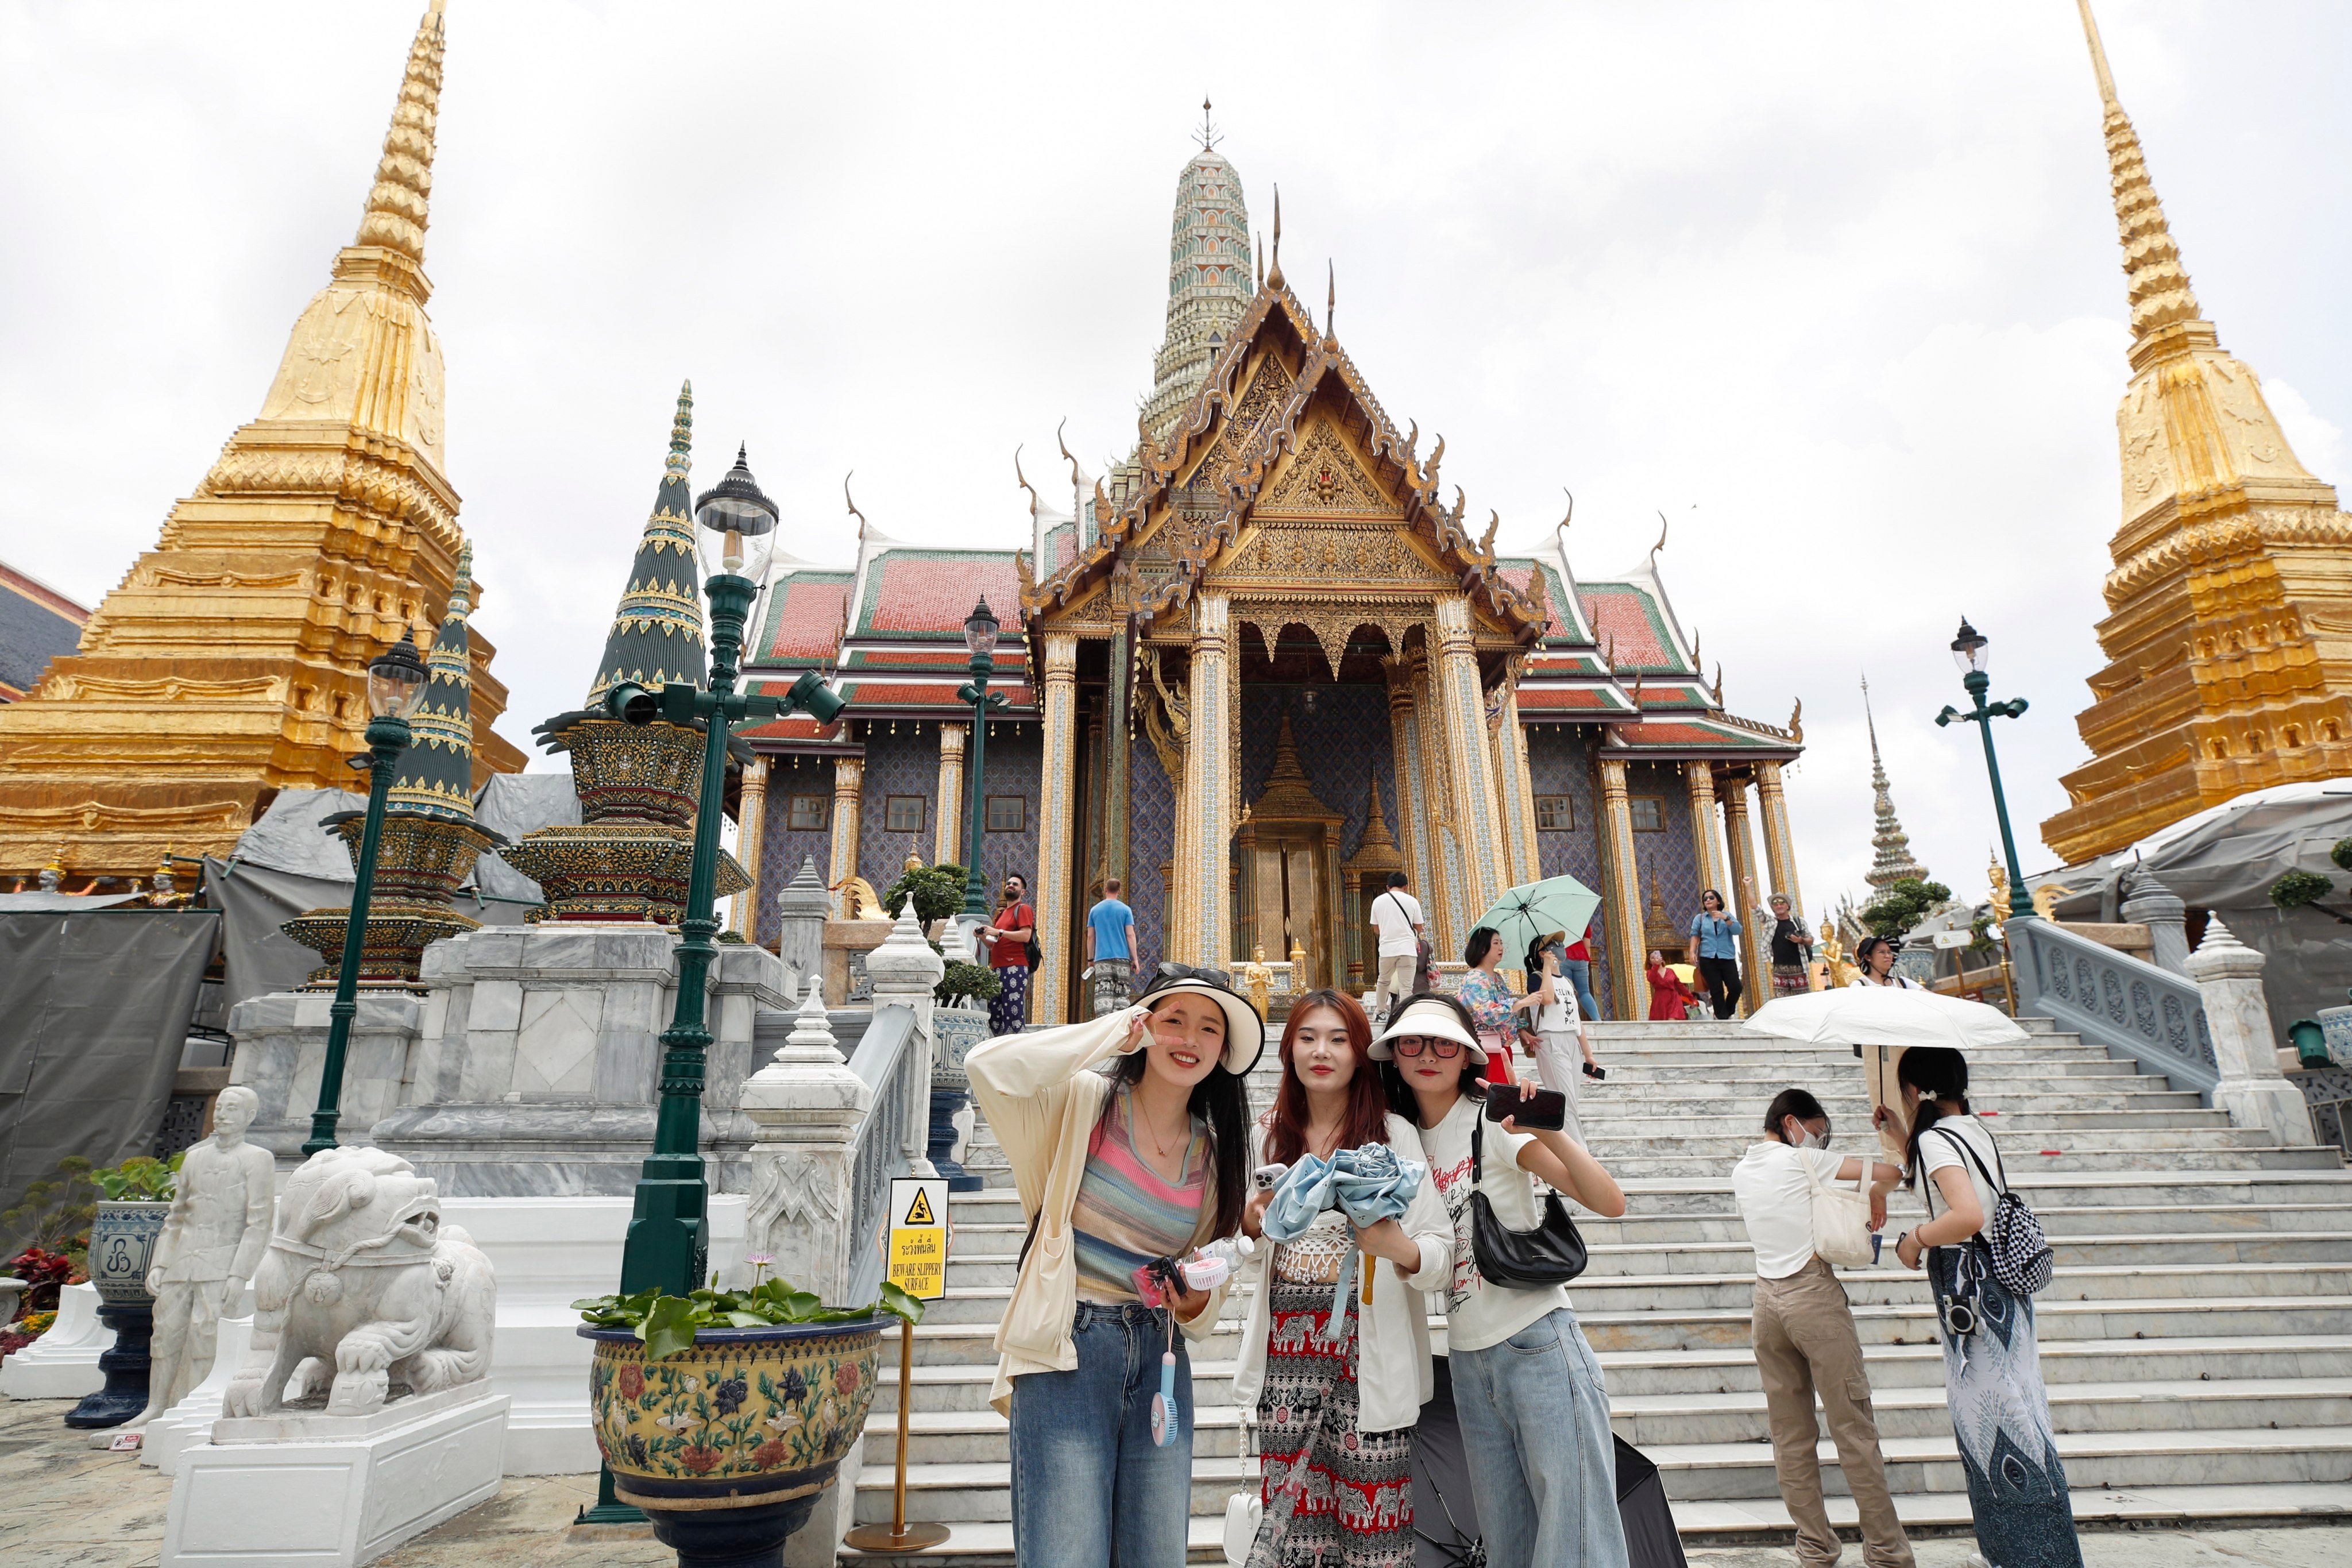 Chinese tourists visit the Temple of the Emerald Buddha in Bangkok earlier this year. Photo: EPA-EFE